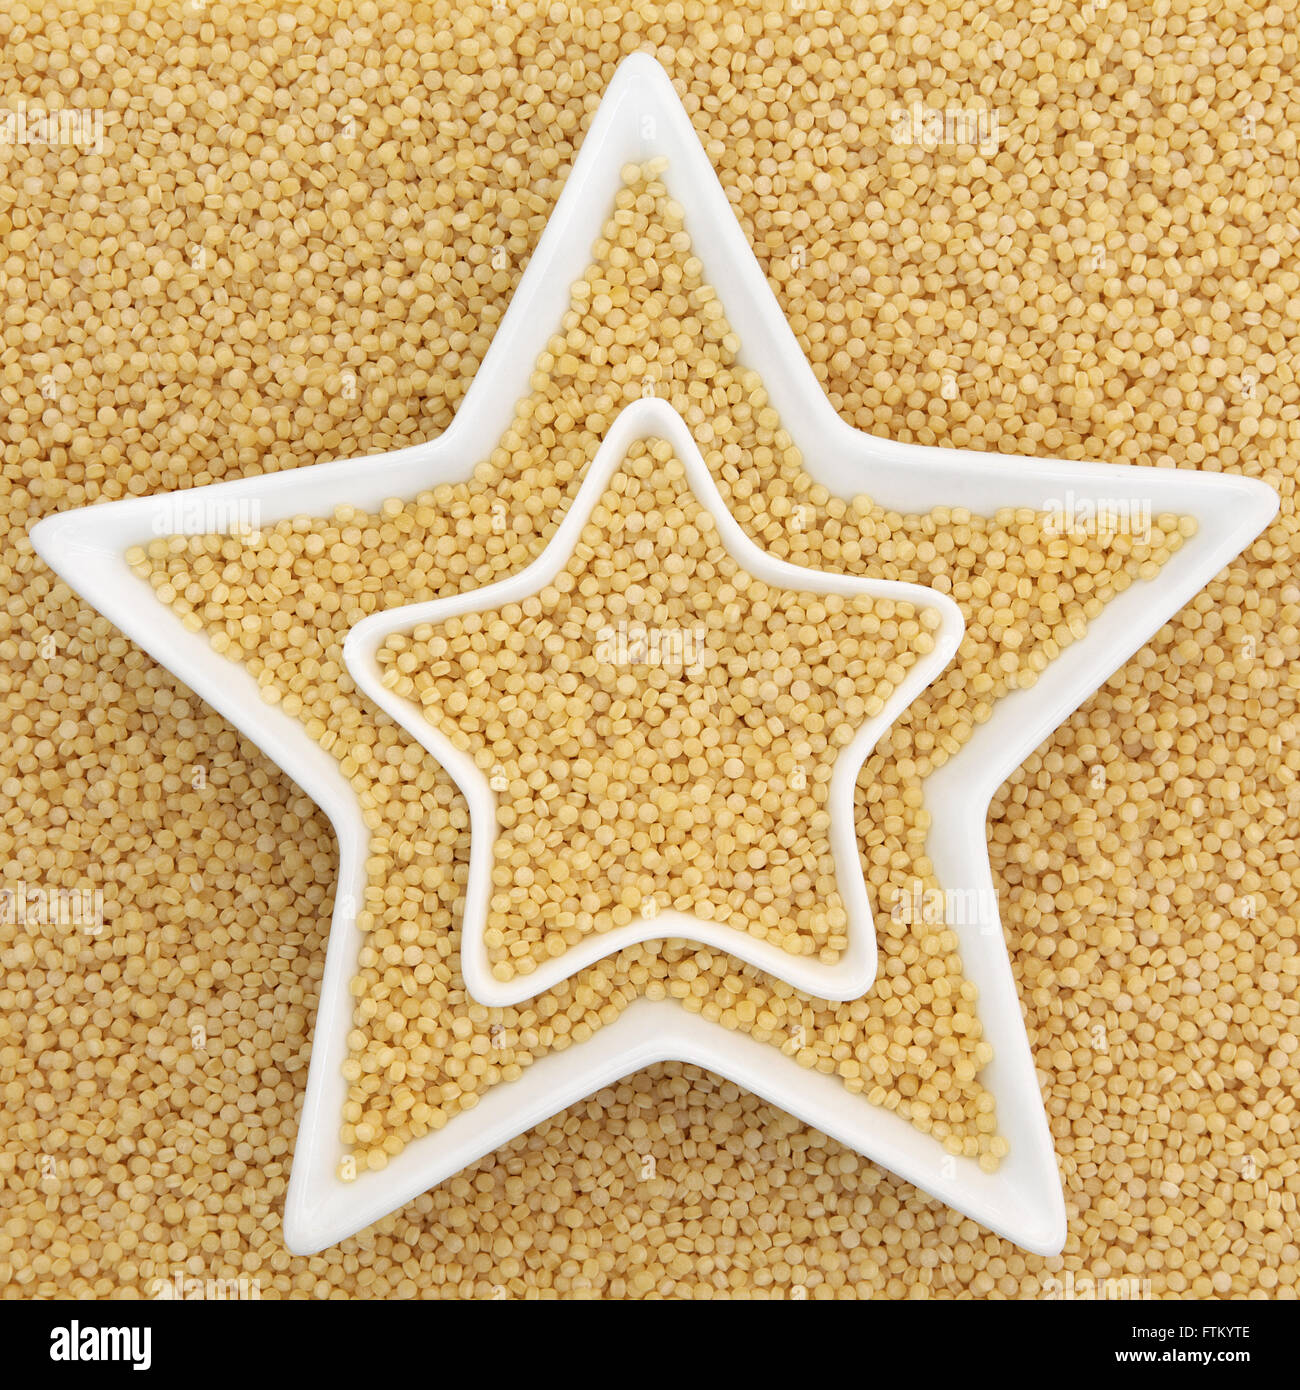 Pearl couscous health food in star shaped bowls forming an abstract background. Stock Photo